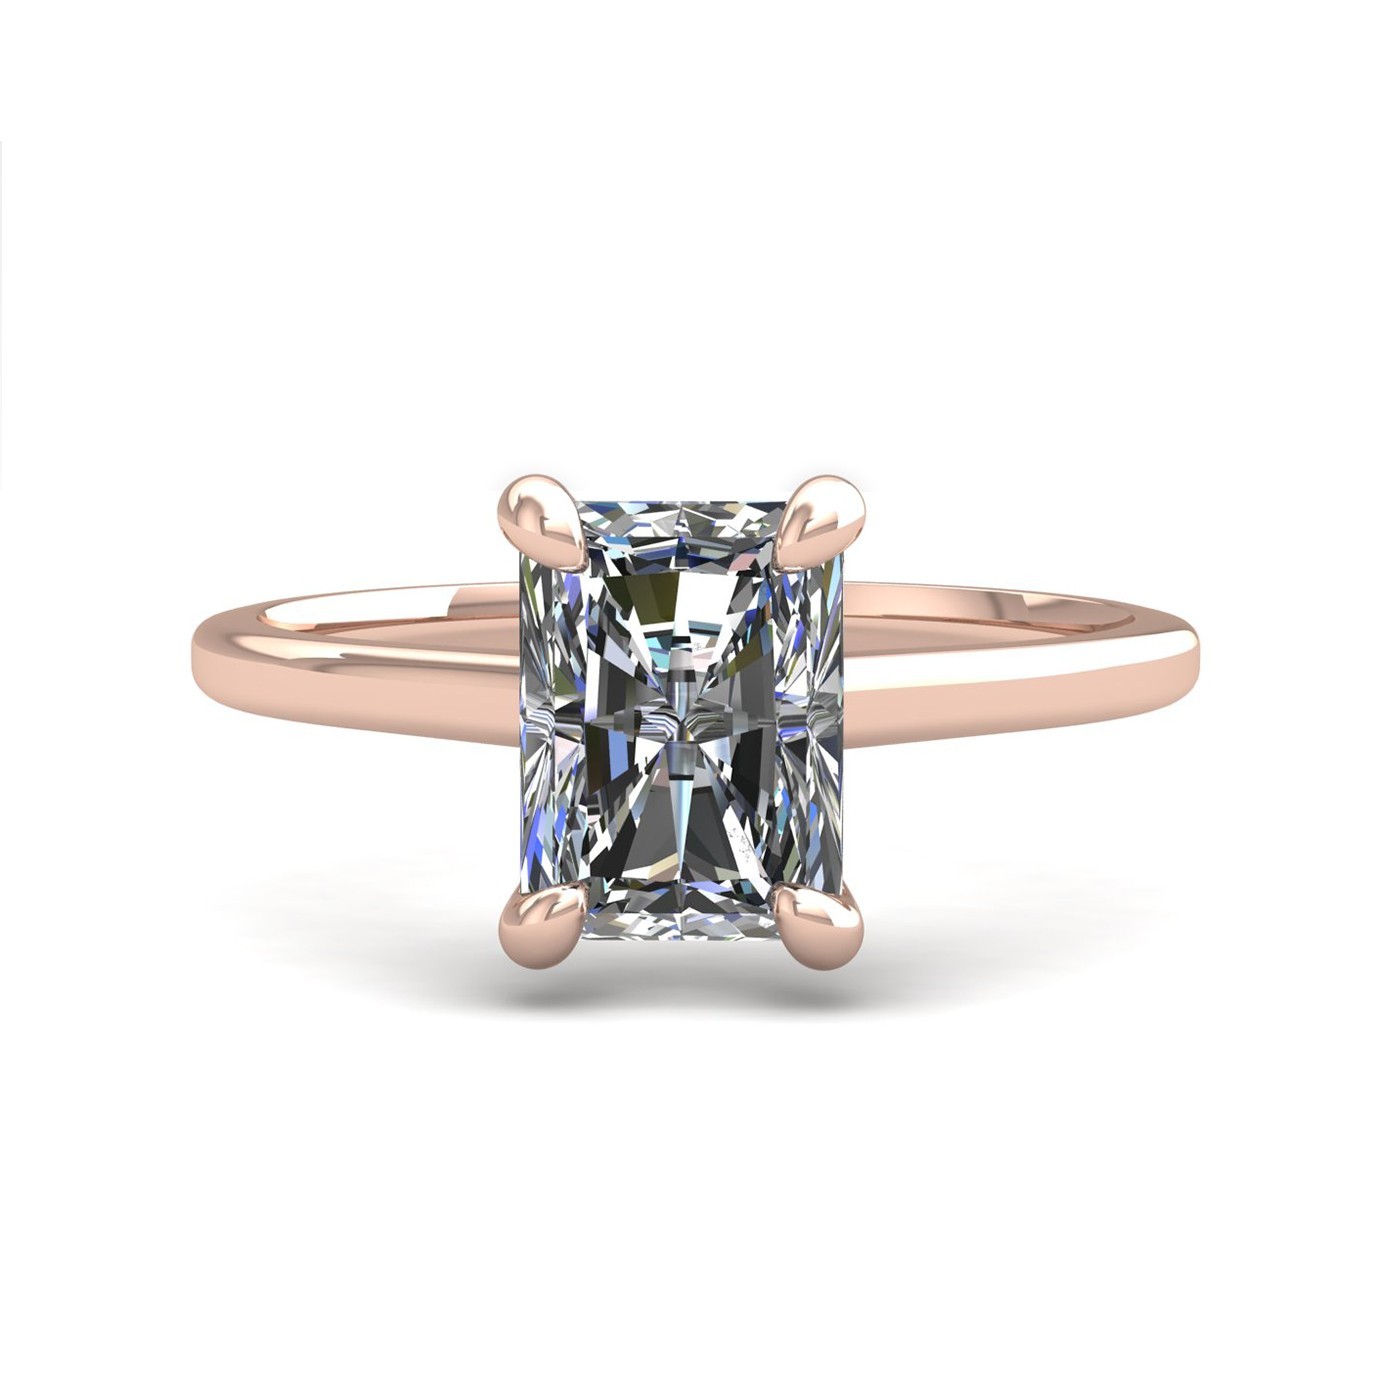 18k yellow gold  1,50 ct 4 prongs solitaire radiant cut diamond engagement ring with whisper thin band Photos & images